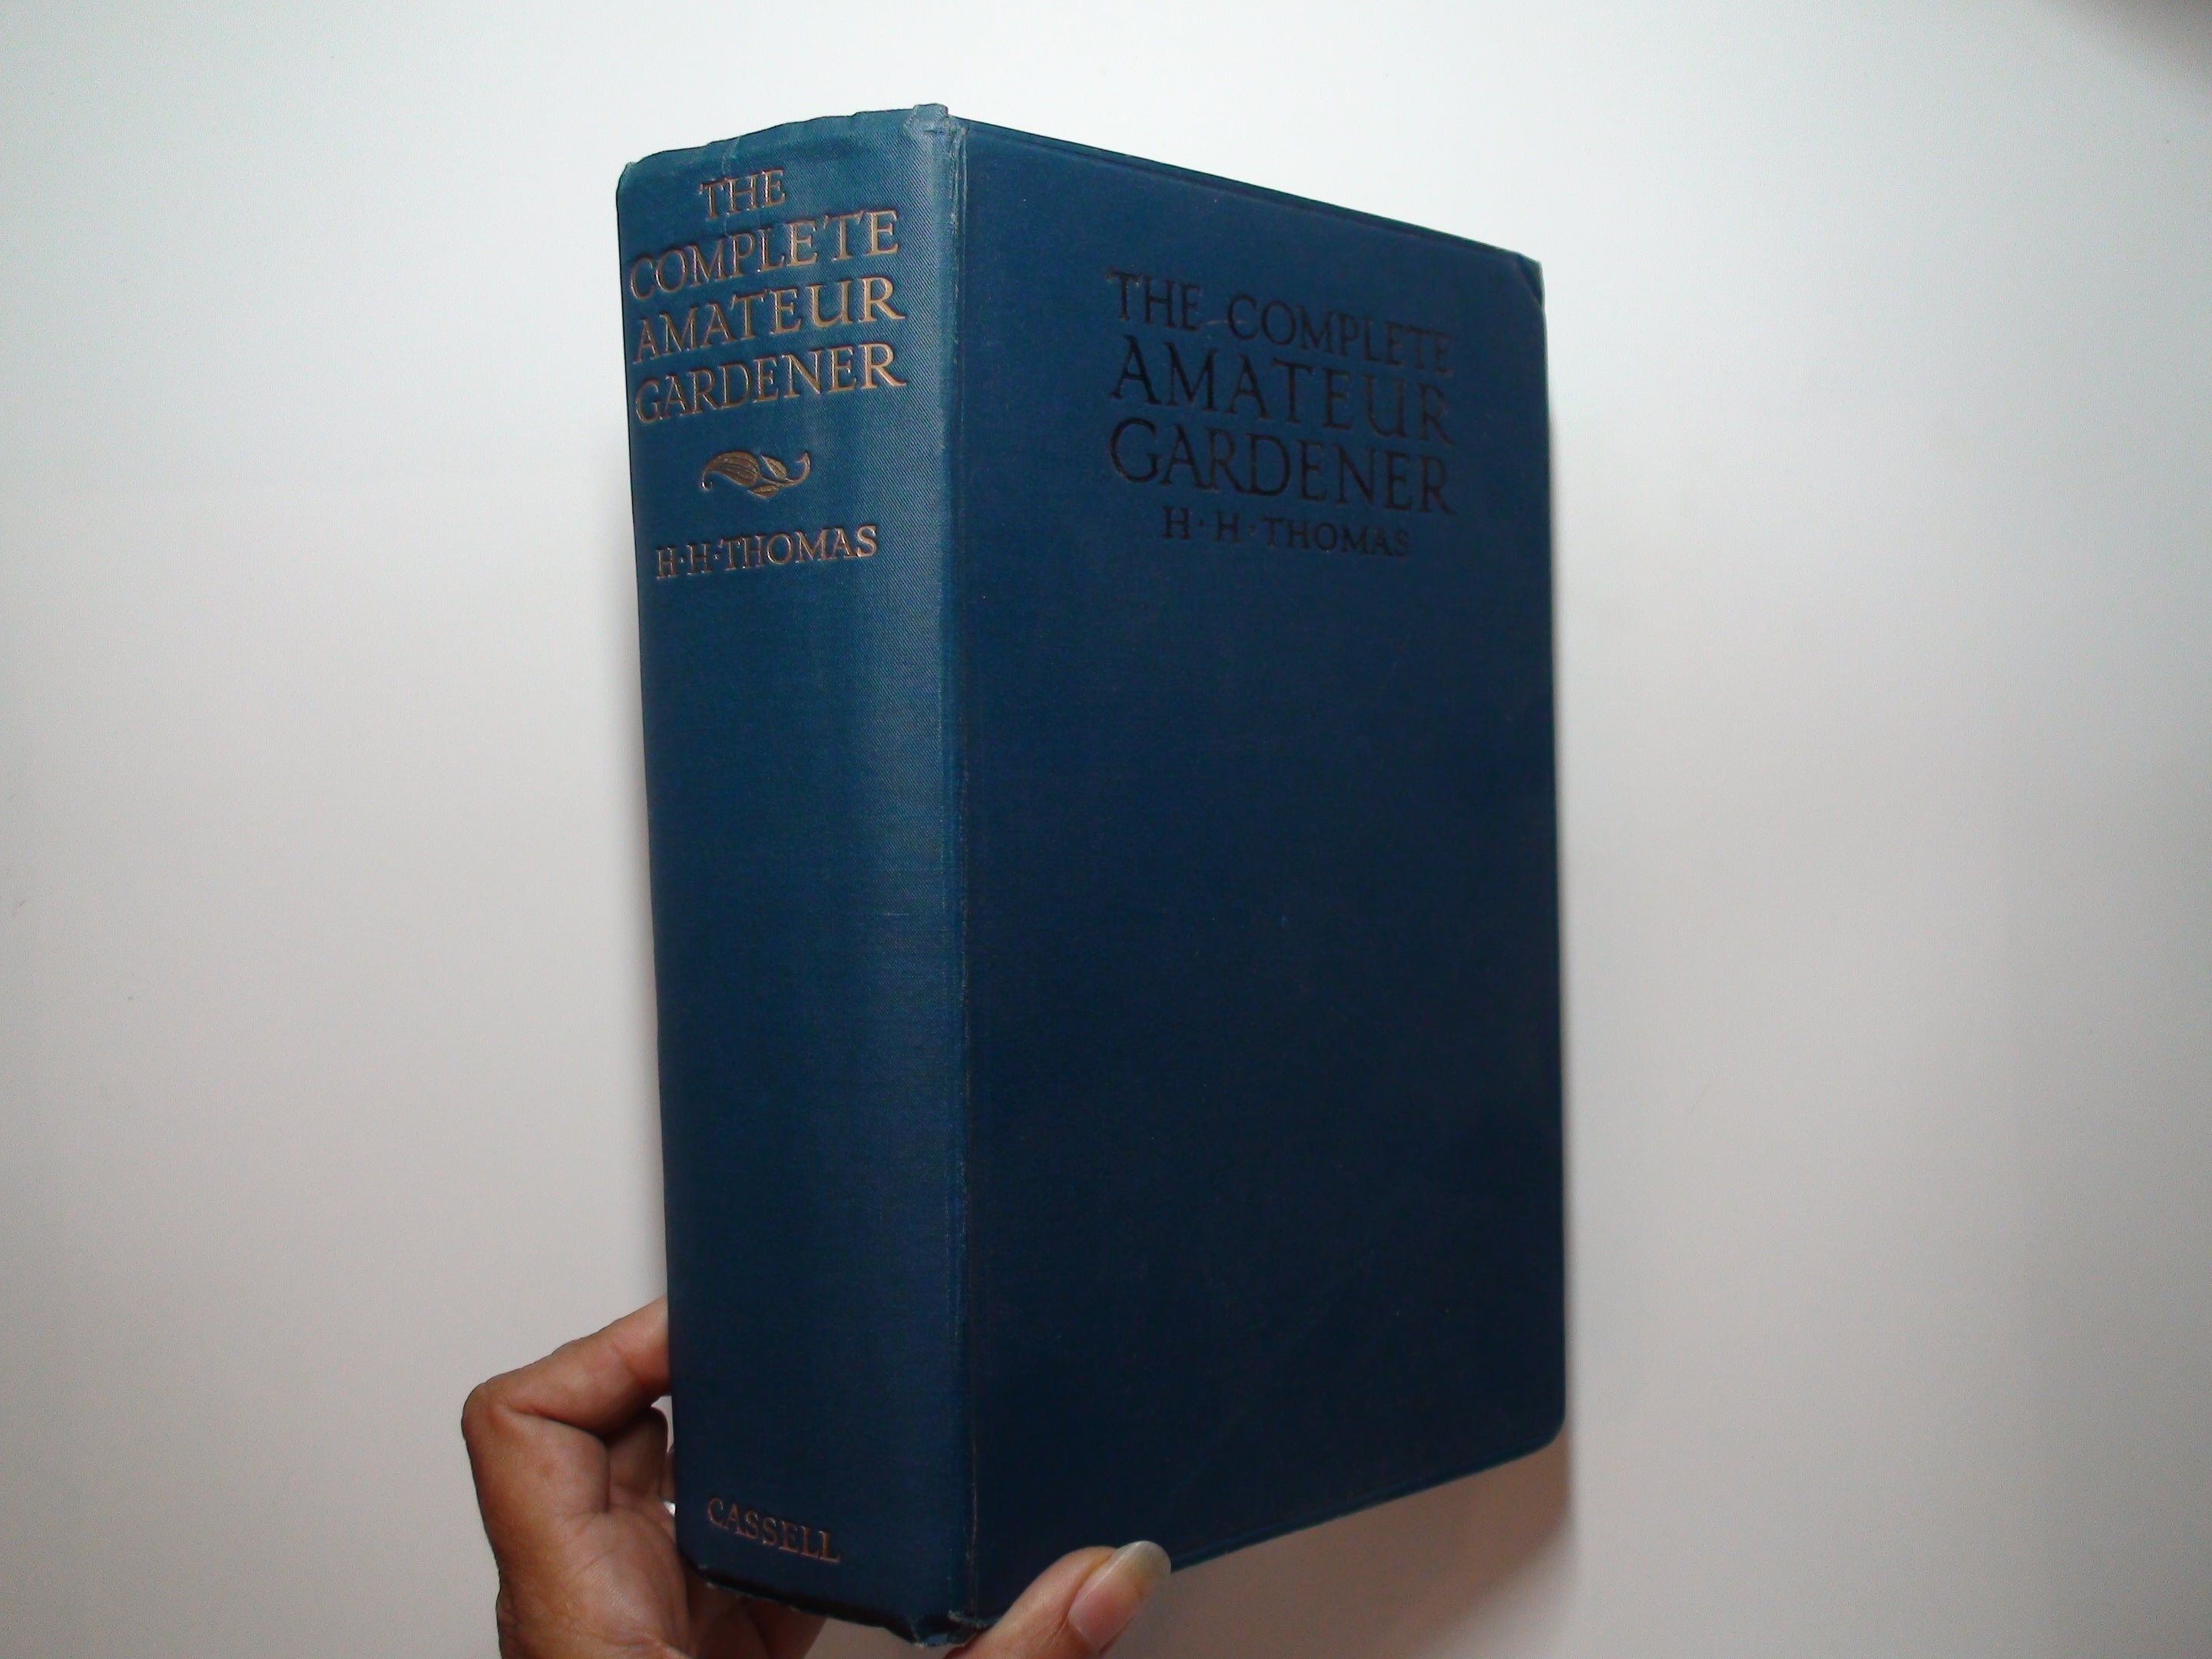 The Complete Amateur Gardener by H. H. Thomas, Illustrated, 1st Ed, 1924